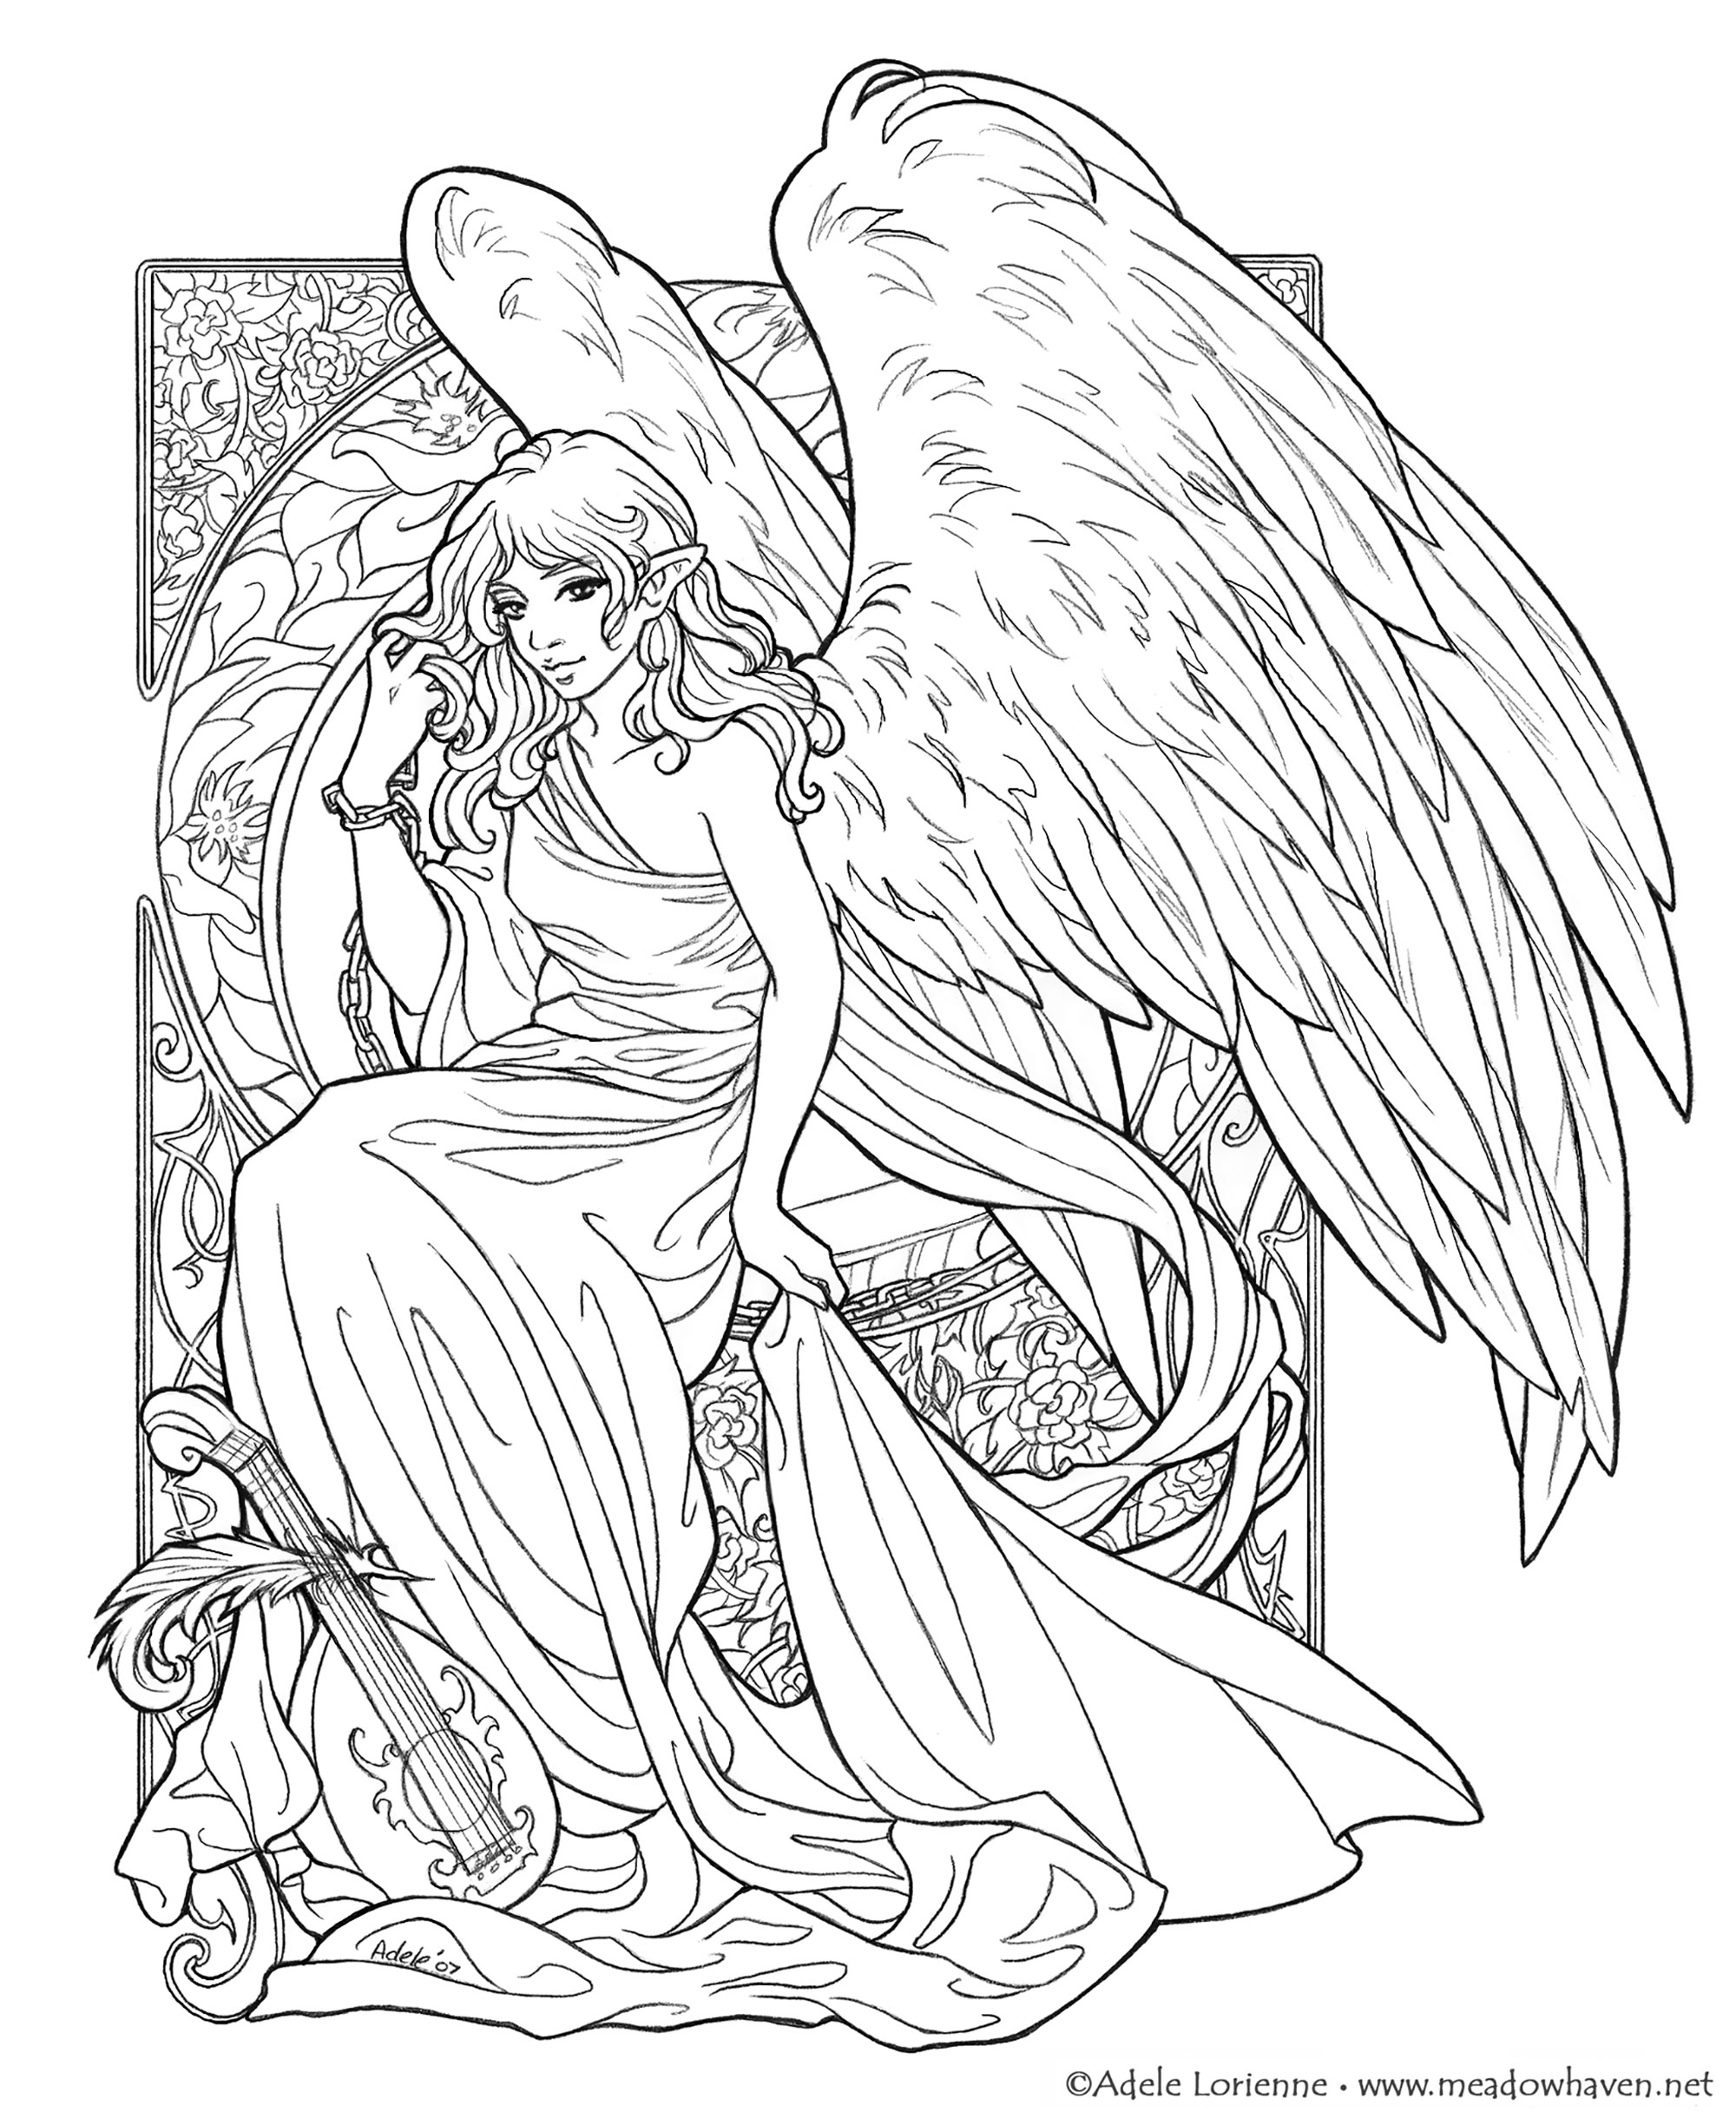 This wings girl is going to be your muse during this coloring !, Artist : Meadowhaven